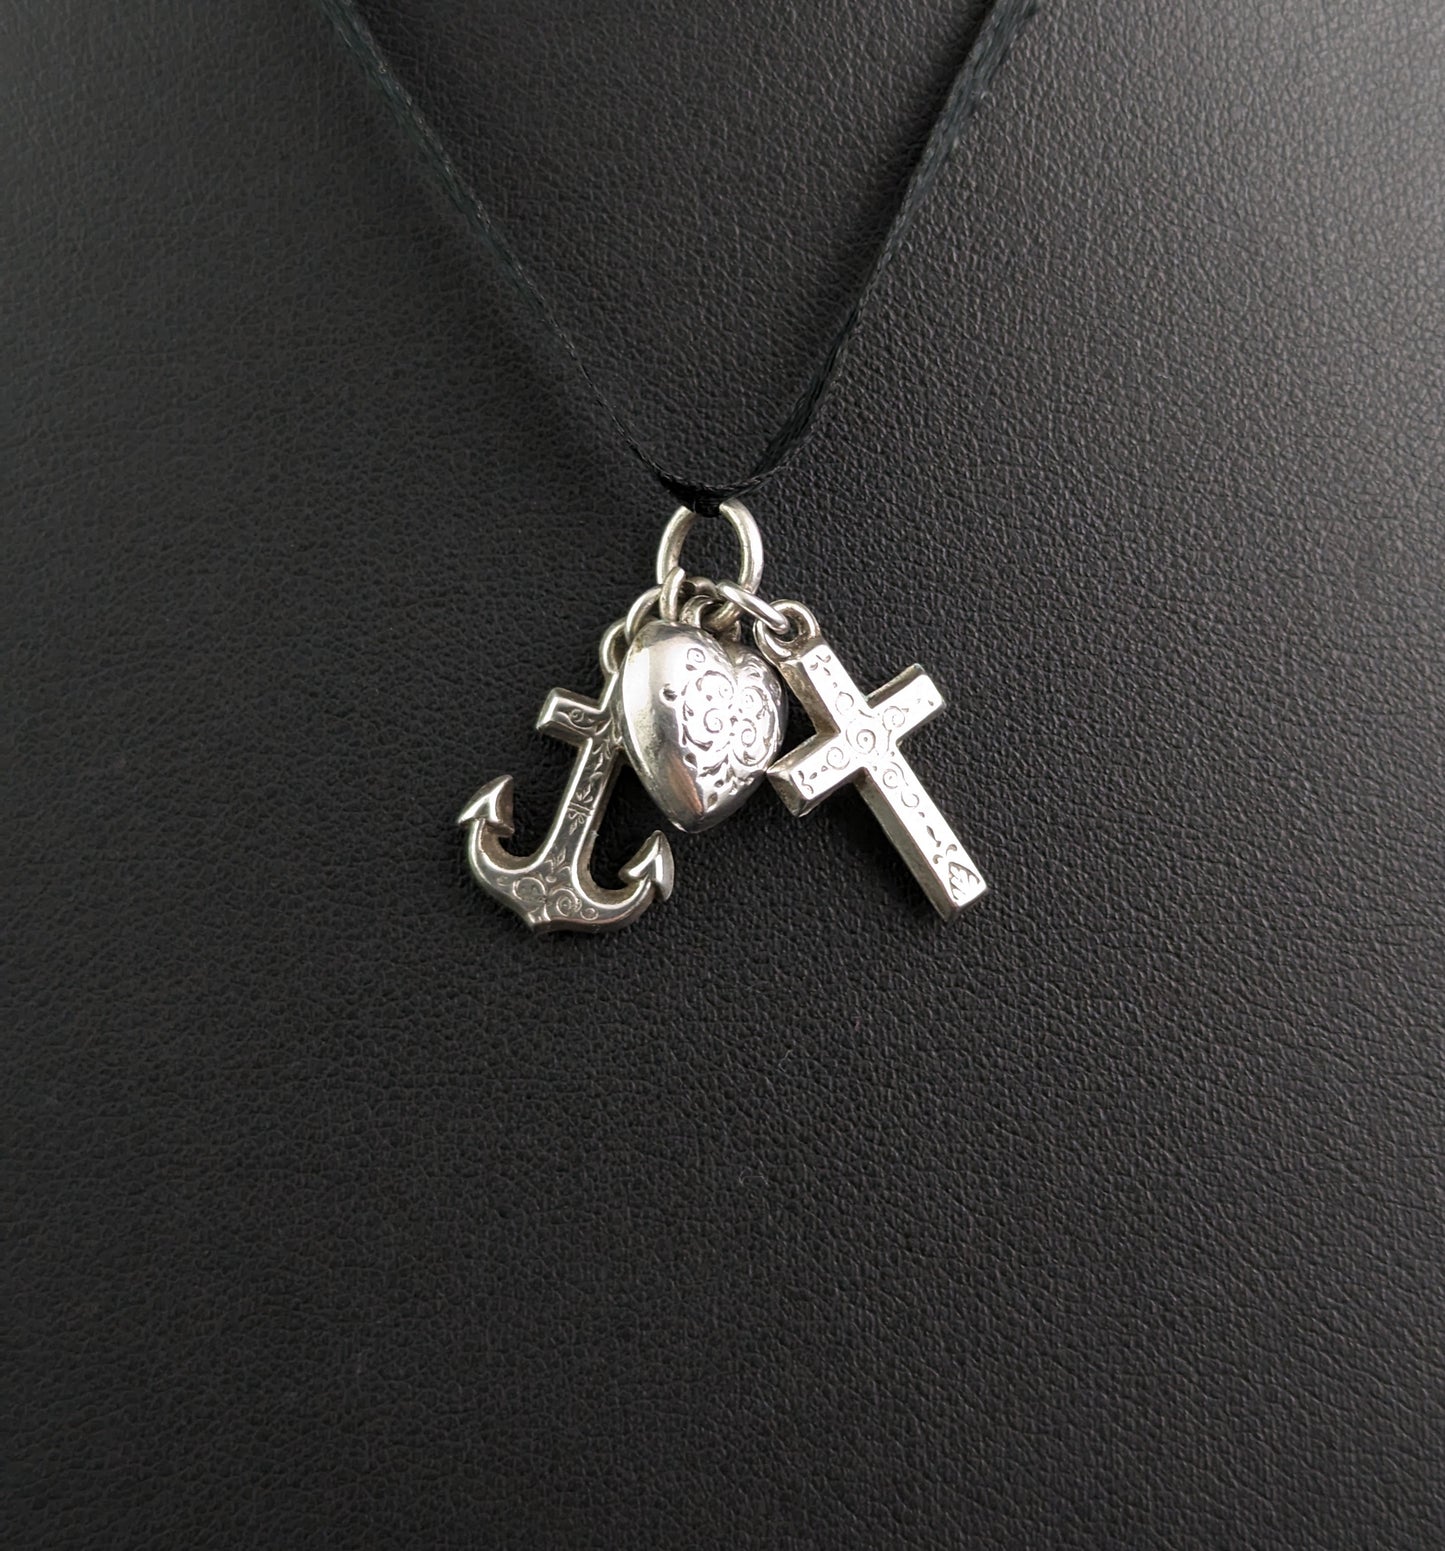 Antique Faith, Hope and Charity charm, Pendant, Sterling silver, Victorian